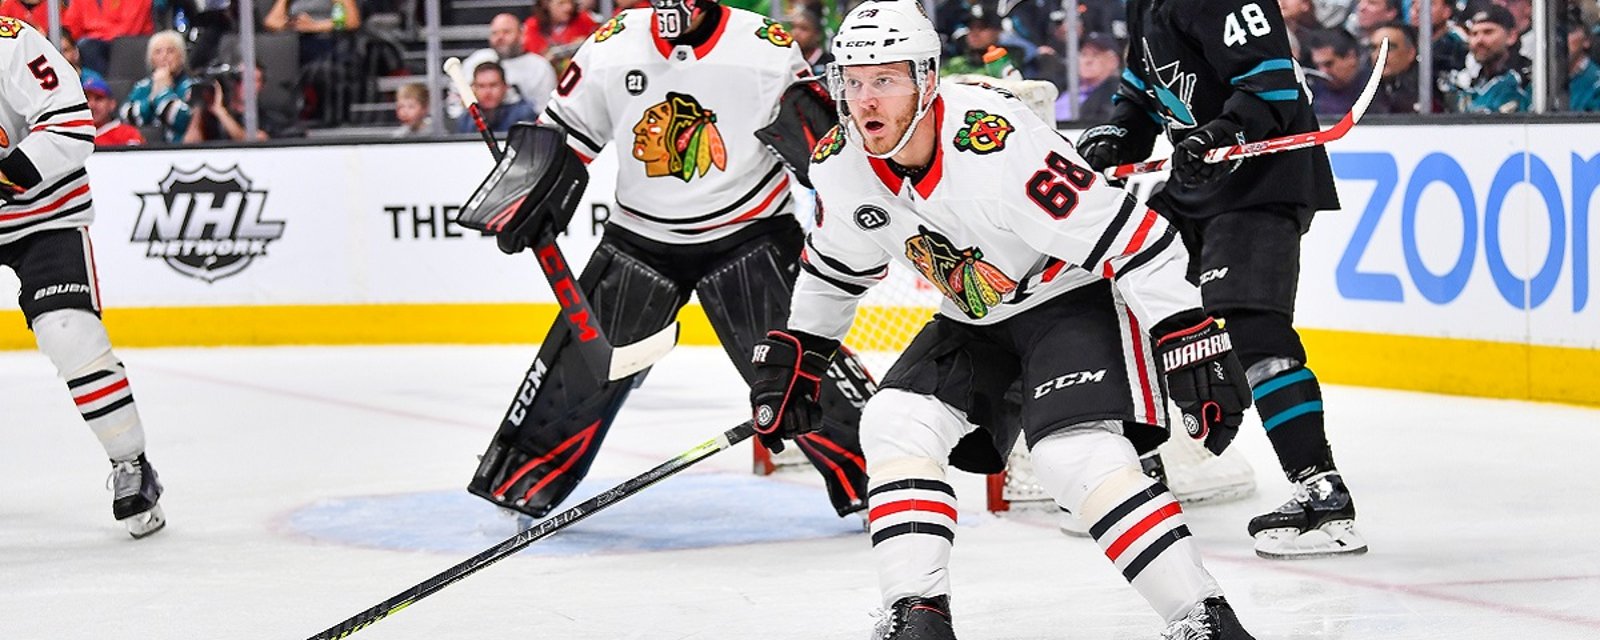 Blackhawks announce a rather unpopular contract extension.